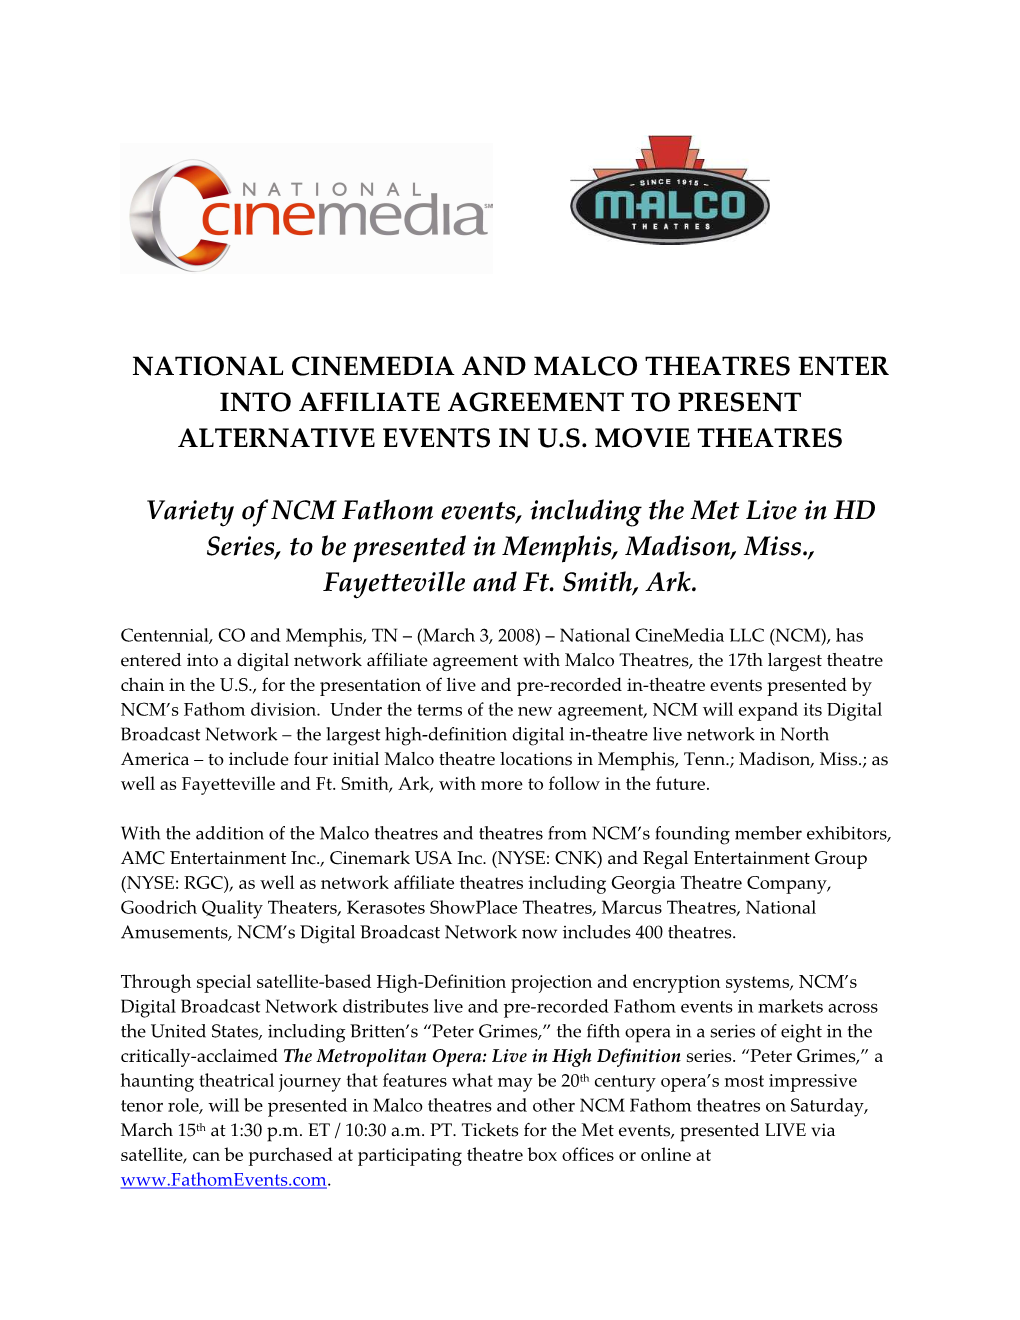 National Cinemedia and Malco Theatres Enter Into Affiliate Agreement to Present Alternative Events in U.S